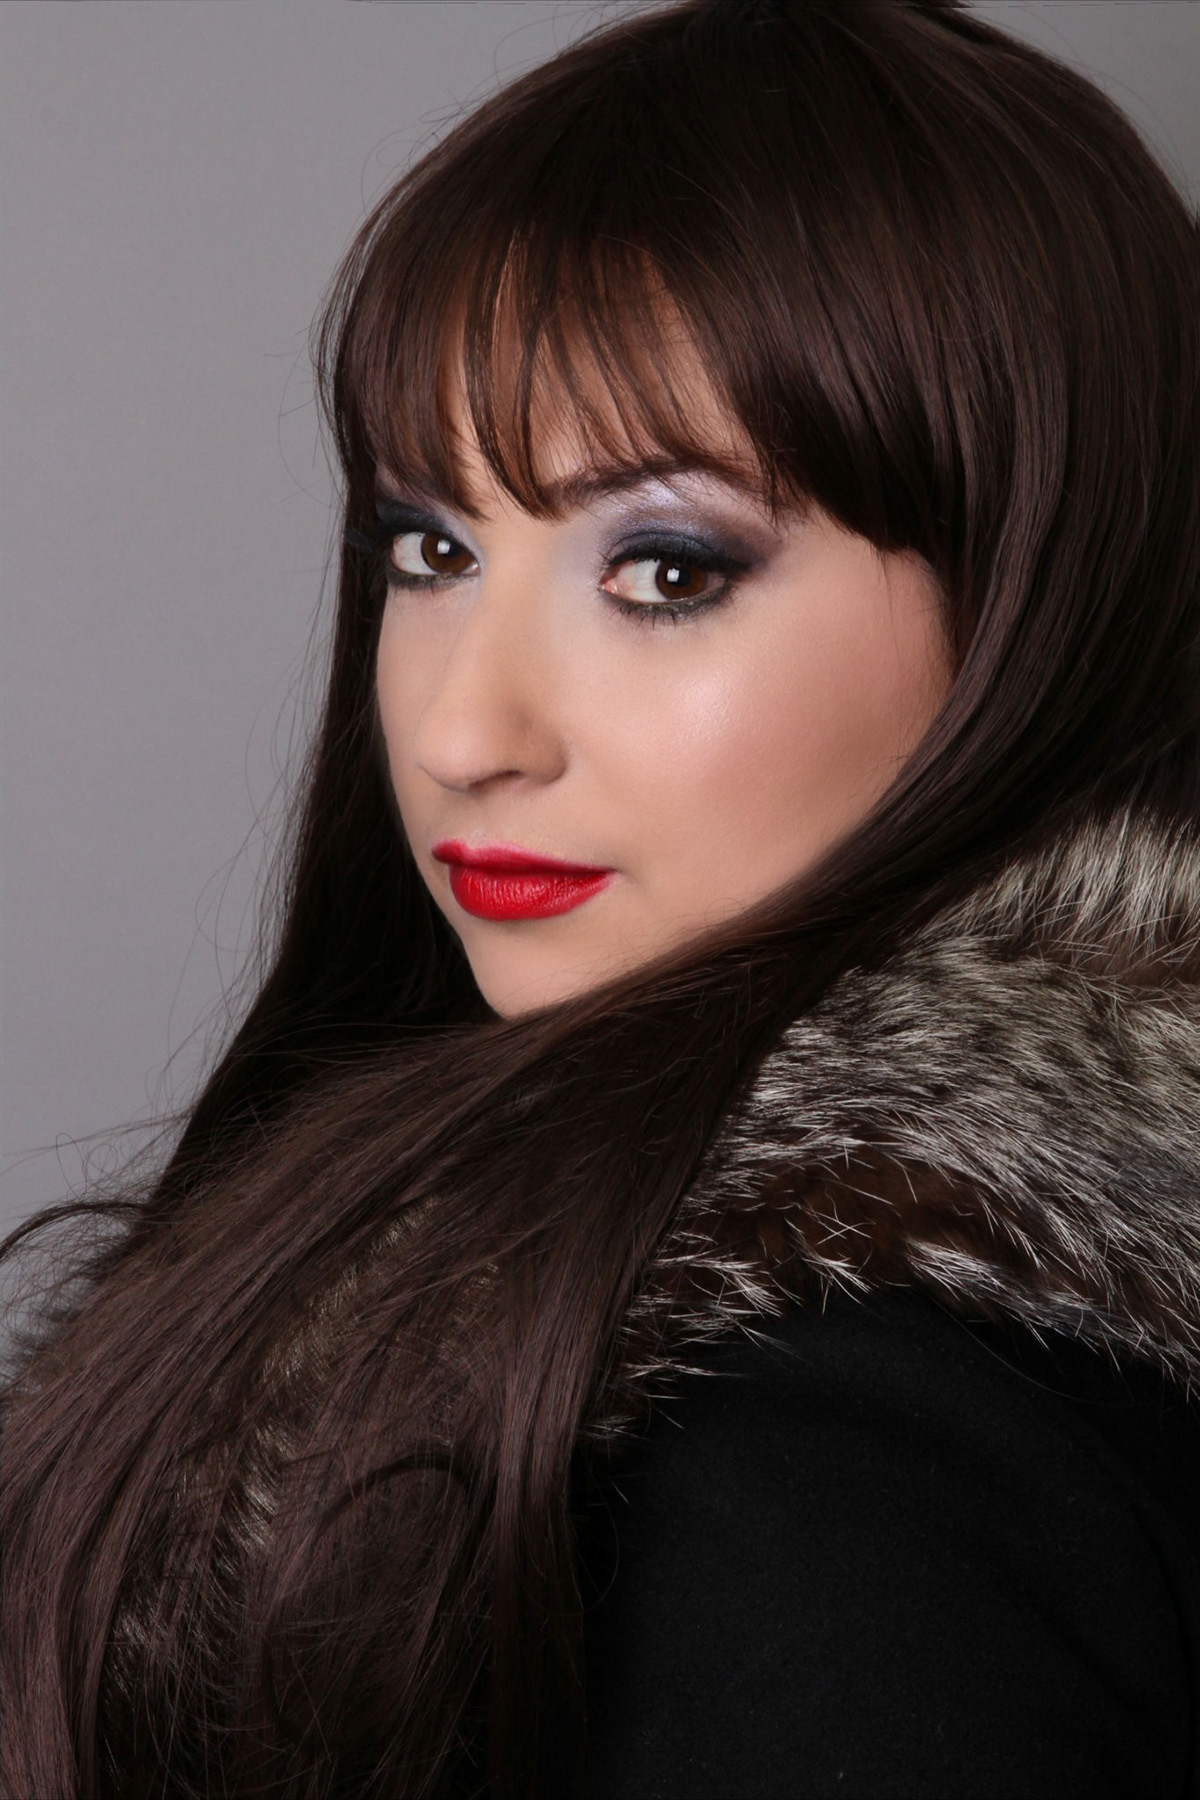 Svetlana russian glam glam Fur smoky eye red lips going out russian hat